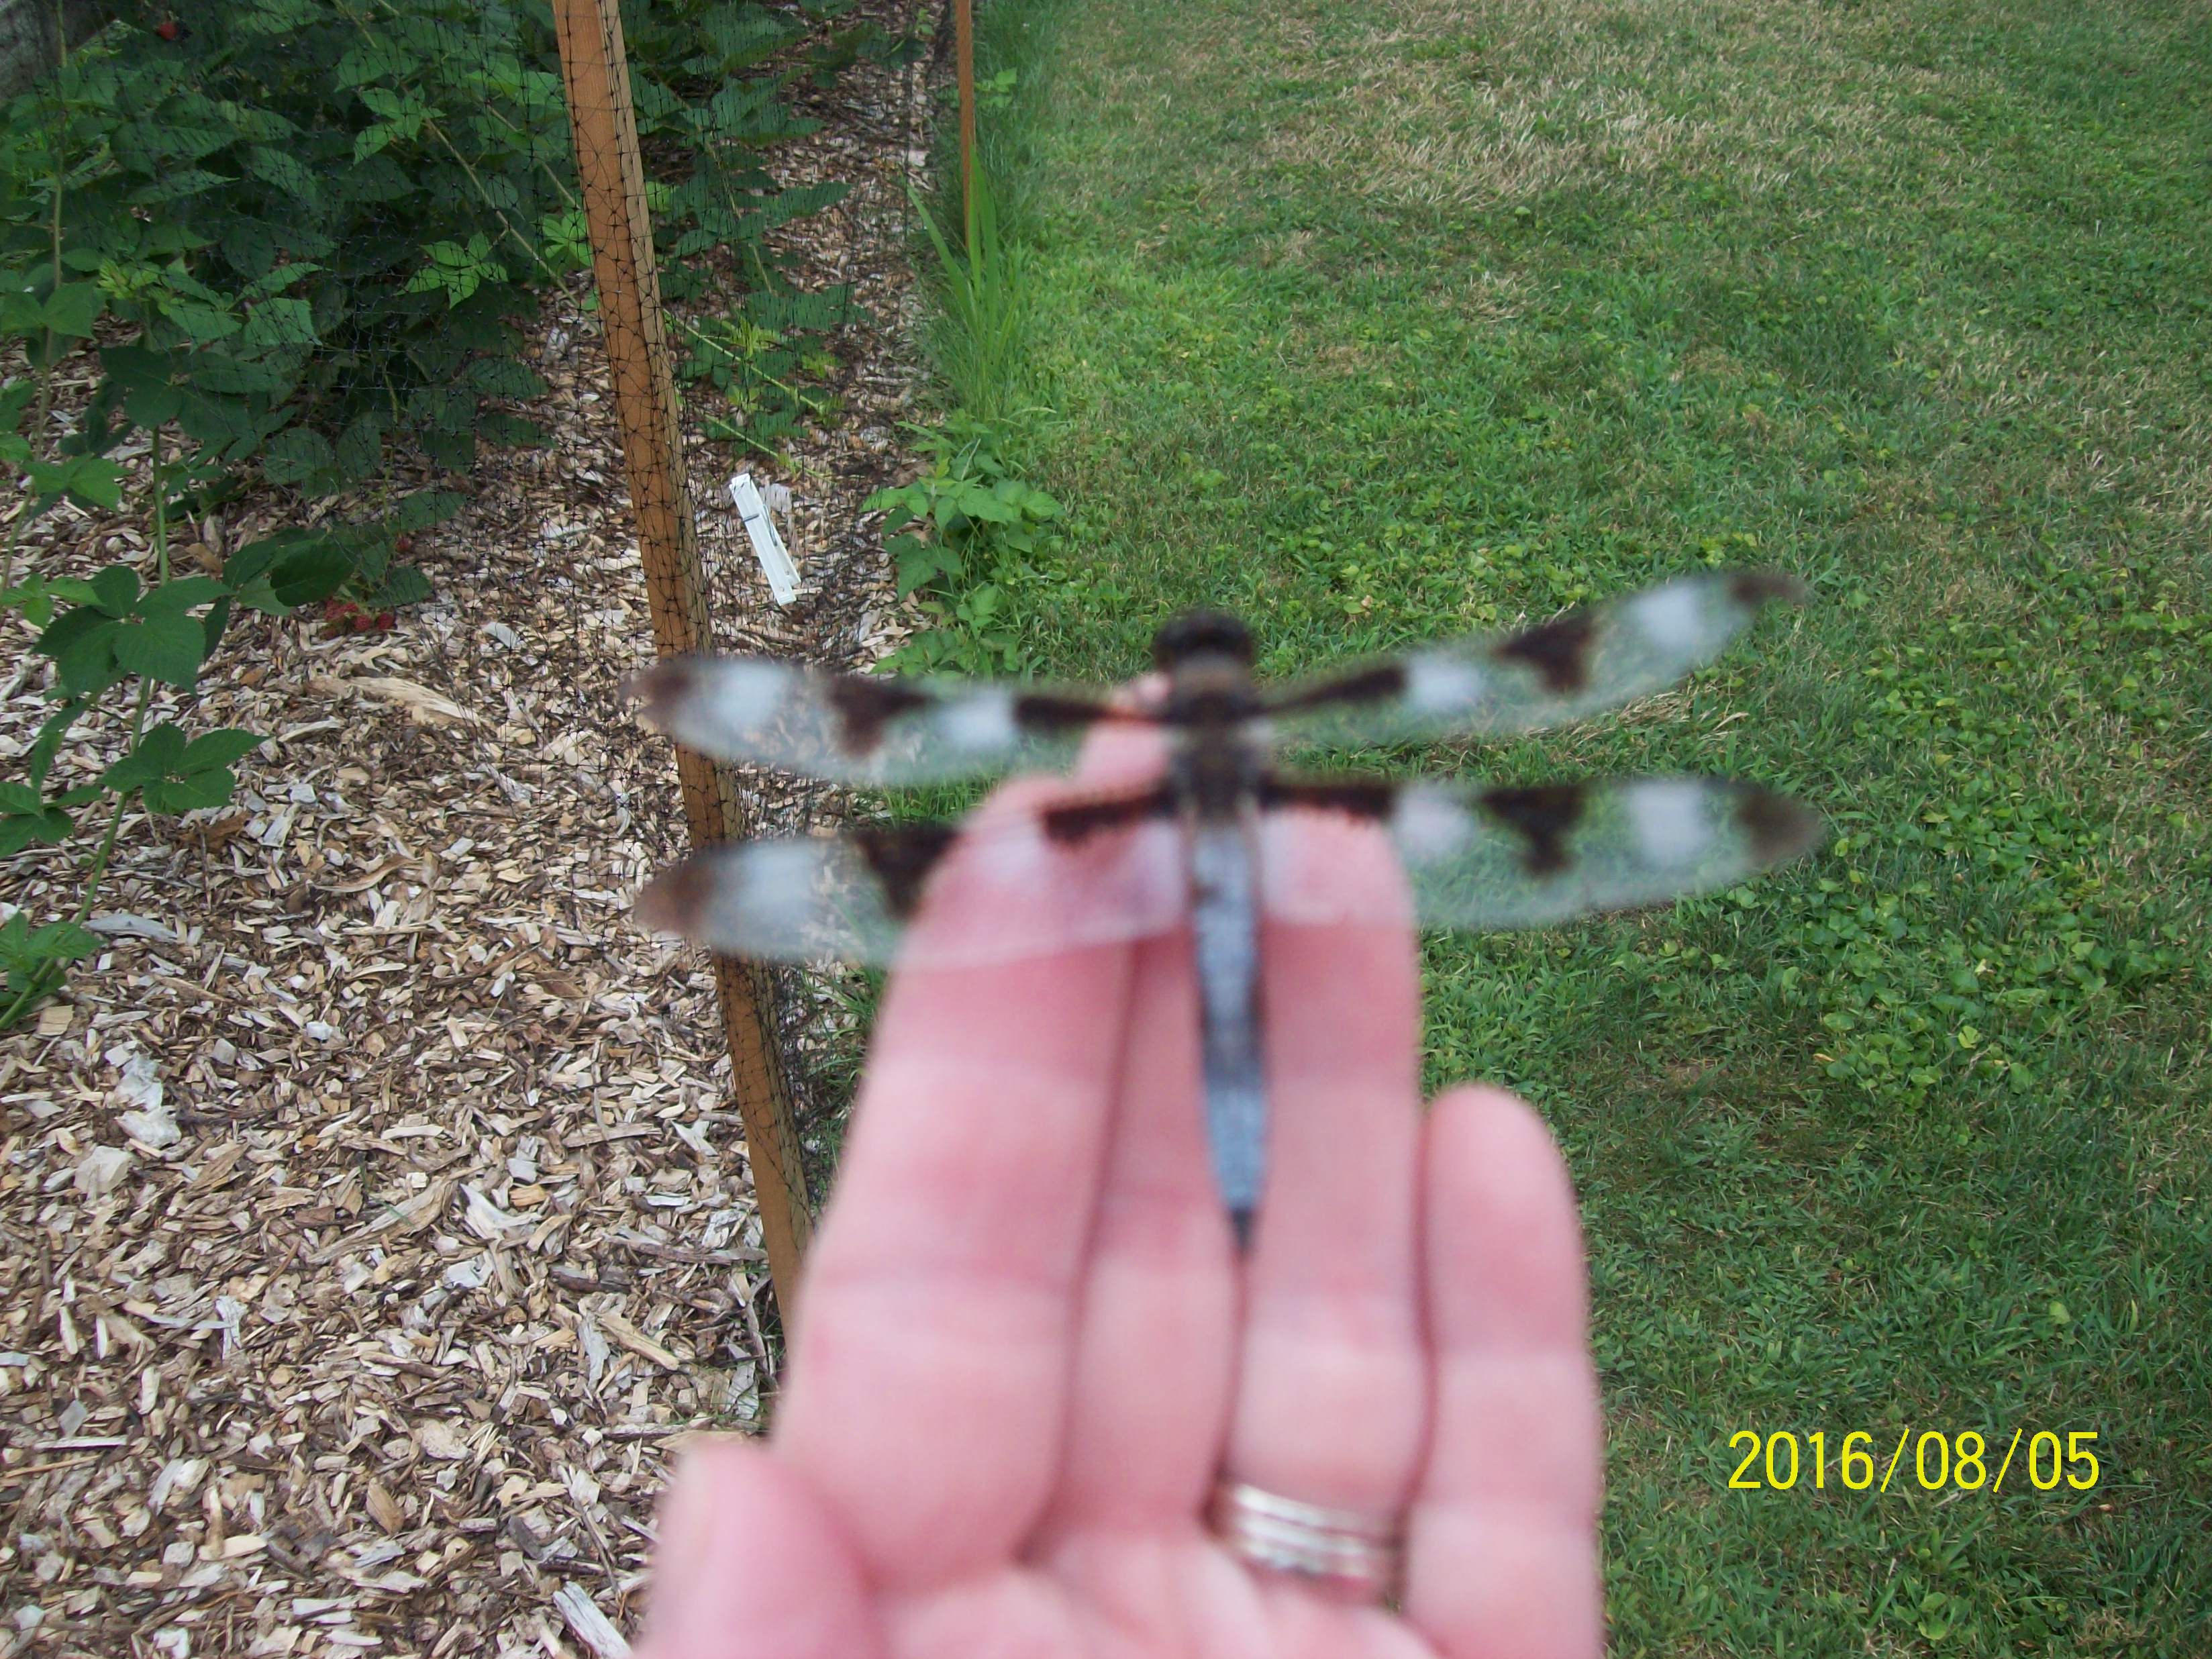 Awesome garden visitor! 
They come every end of summer to the backyard. Huge numbers, must be a mating area for them.